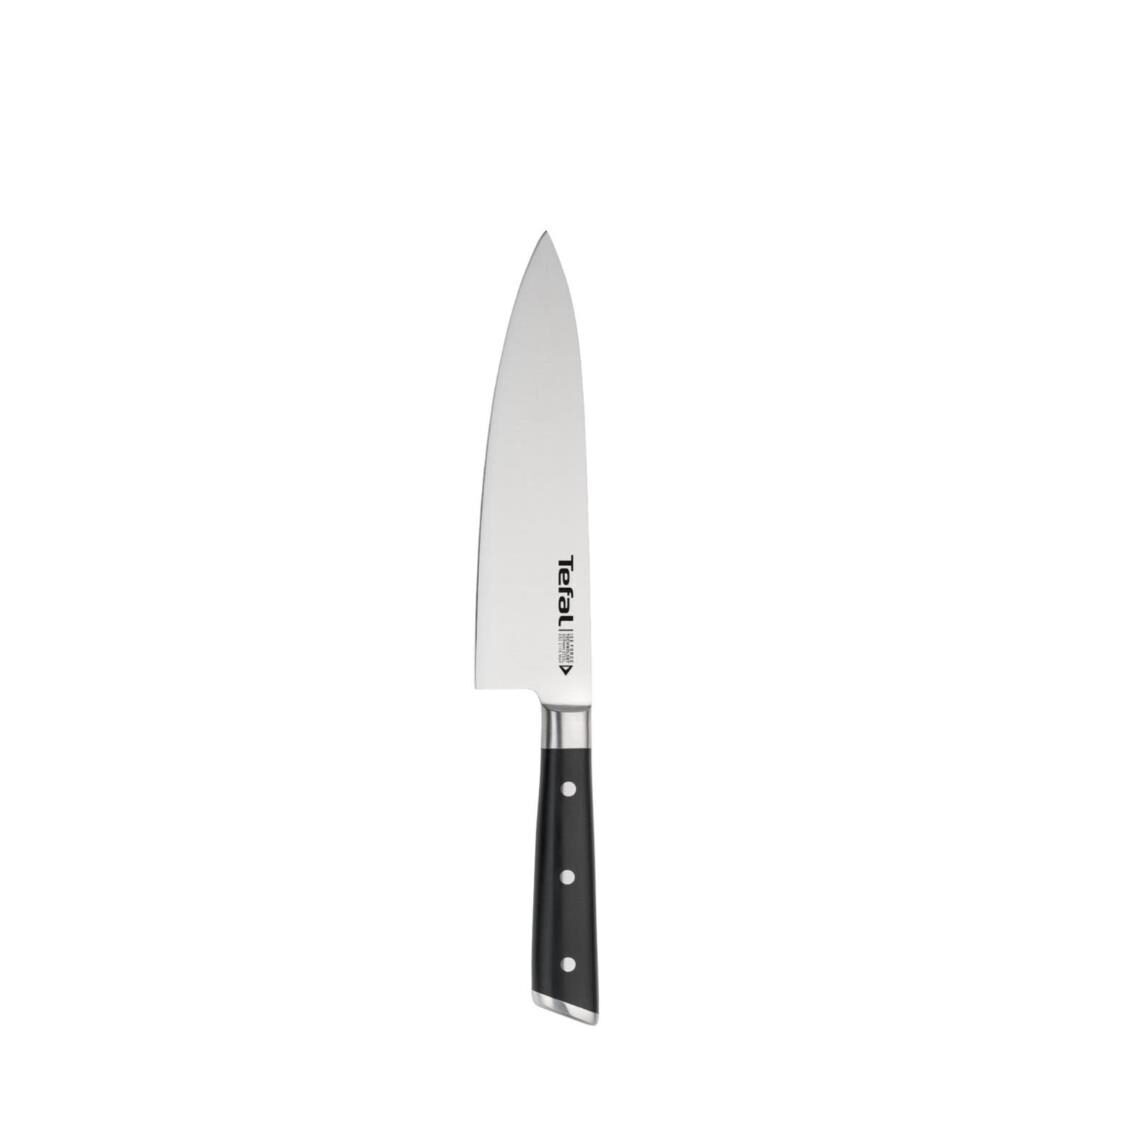 Tefal 20cm Chef Knife Ice Force German Stainless Steel Knife K23202